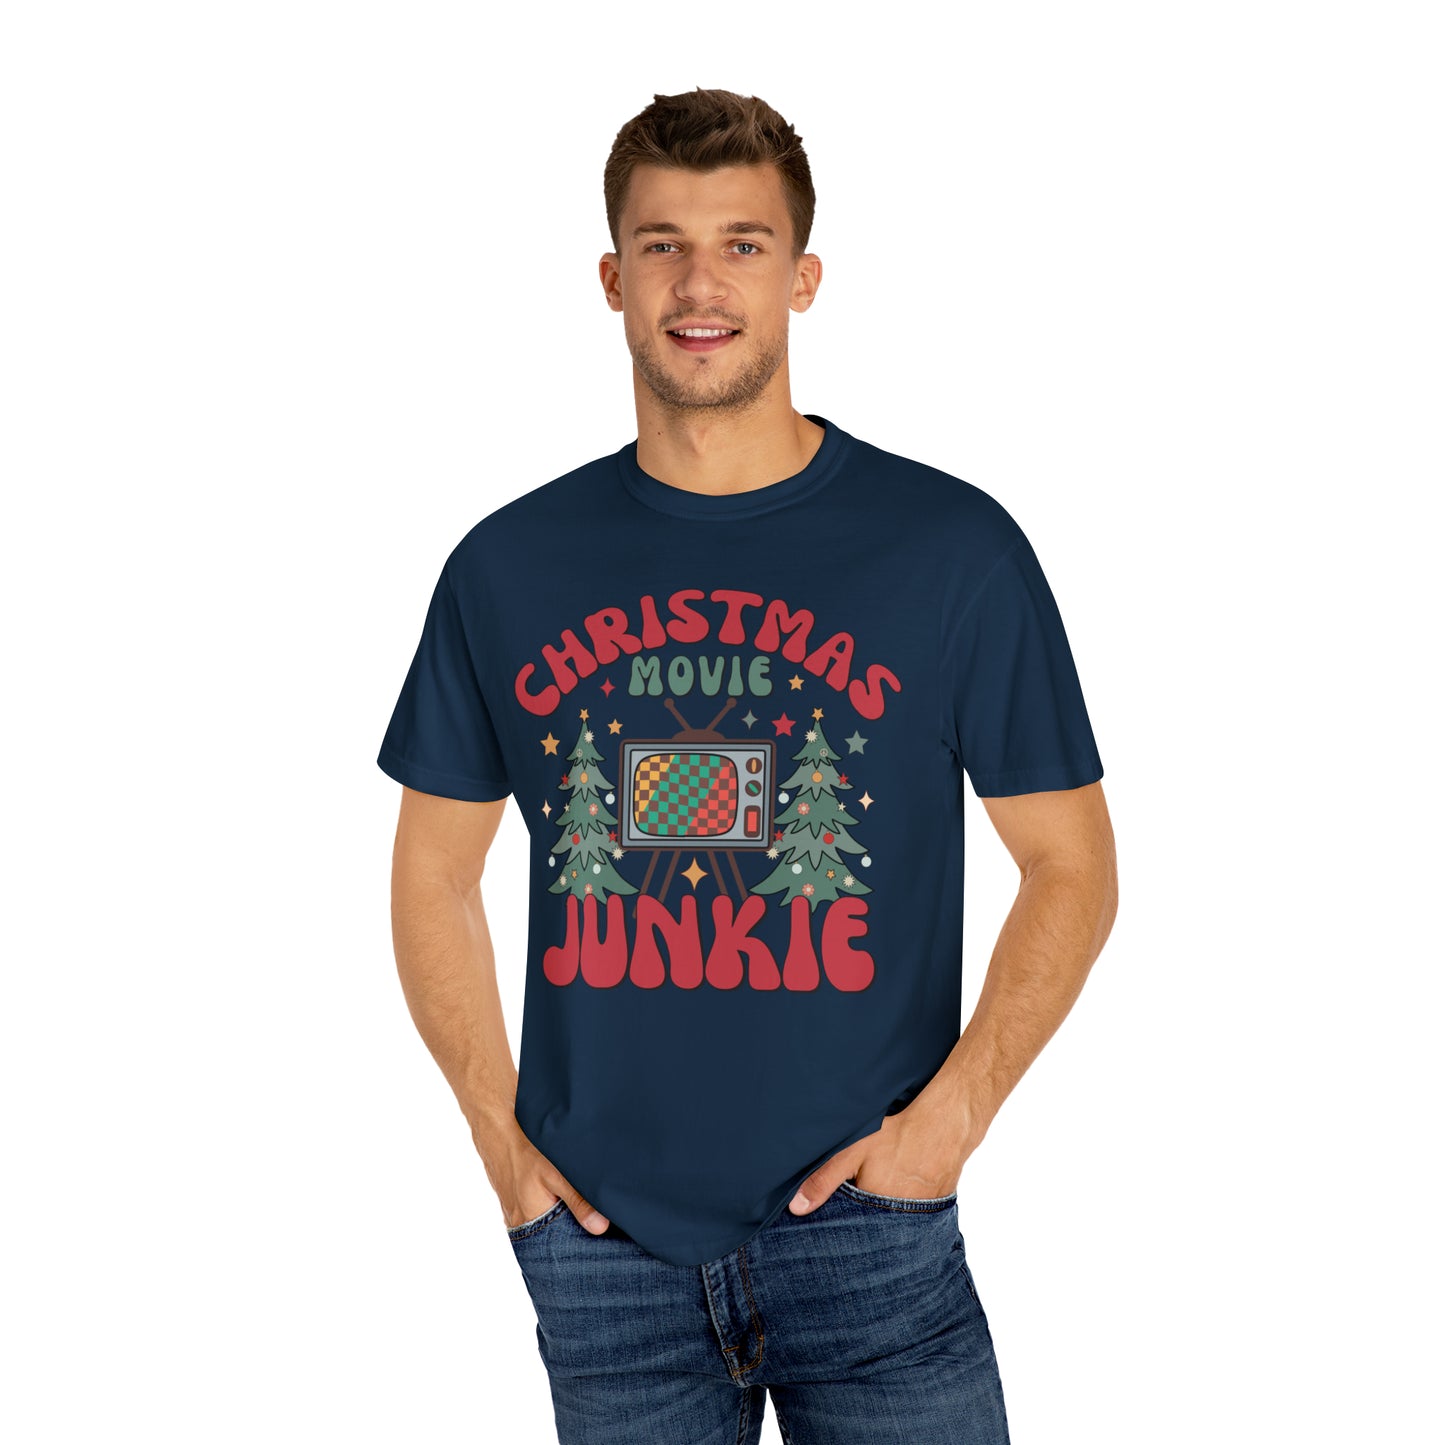 Christmas Movie Junkie | Garment-Dyed Graphic T-shirt